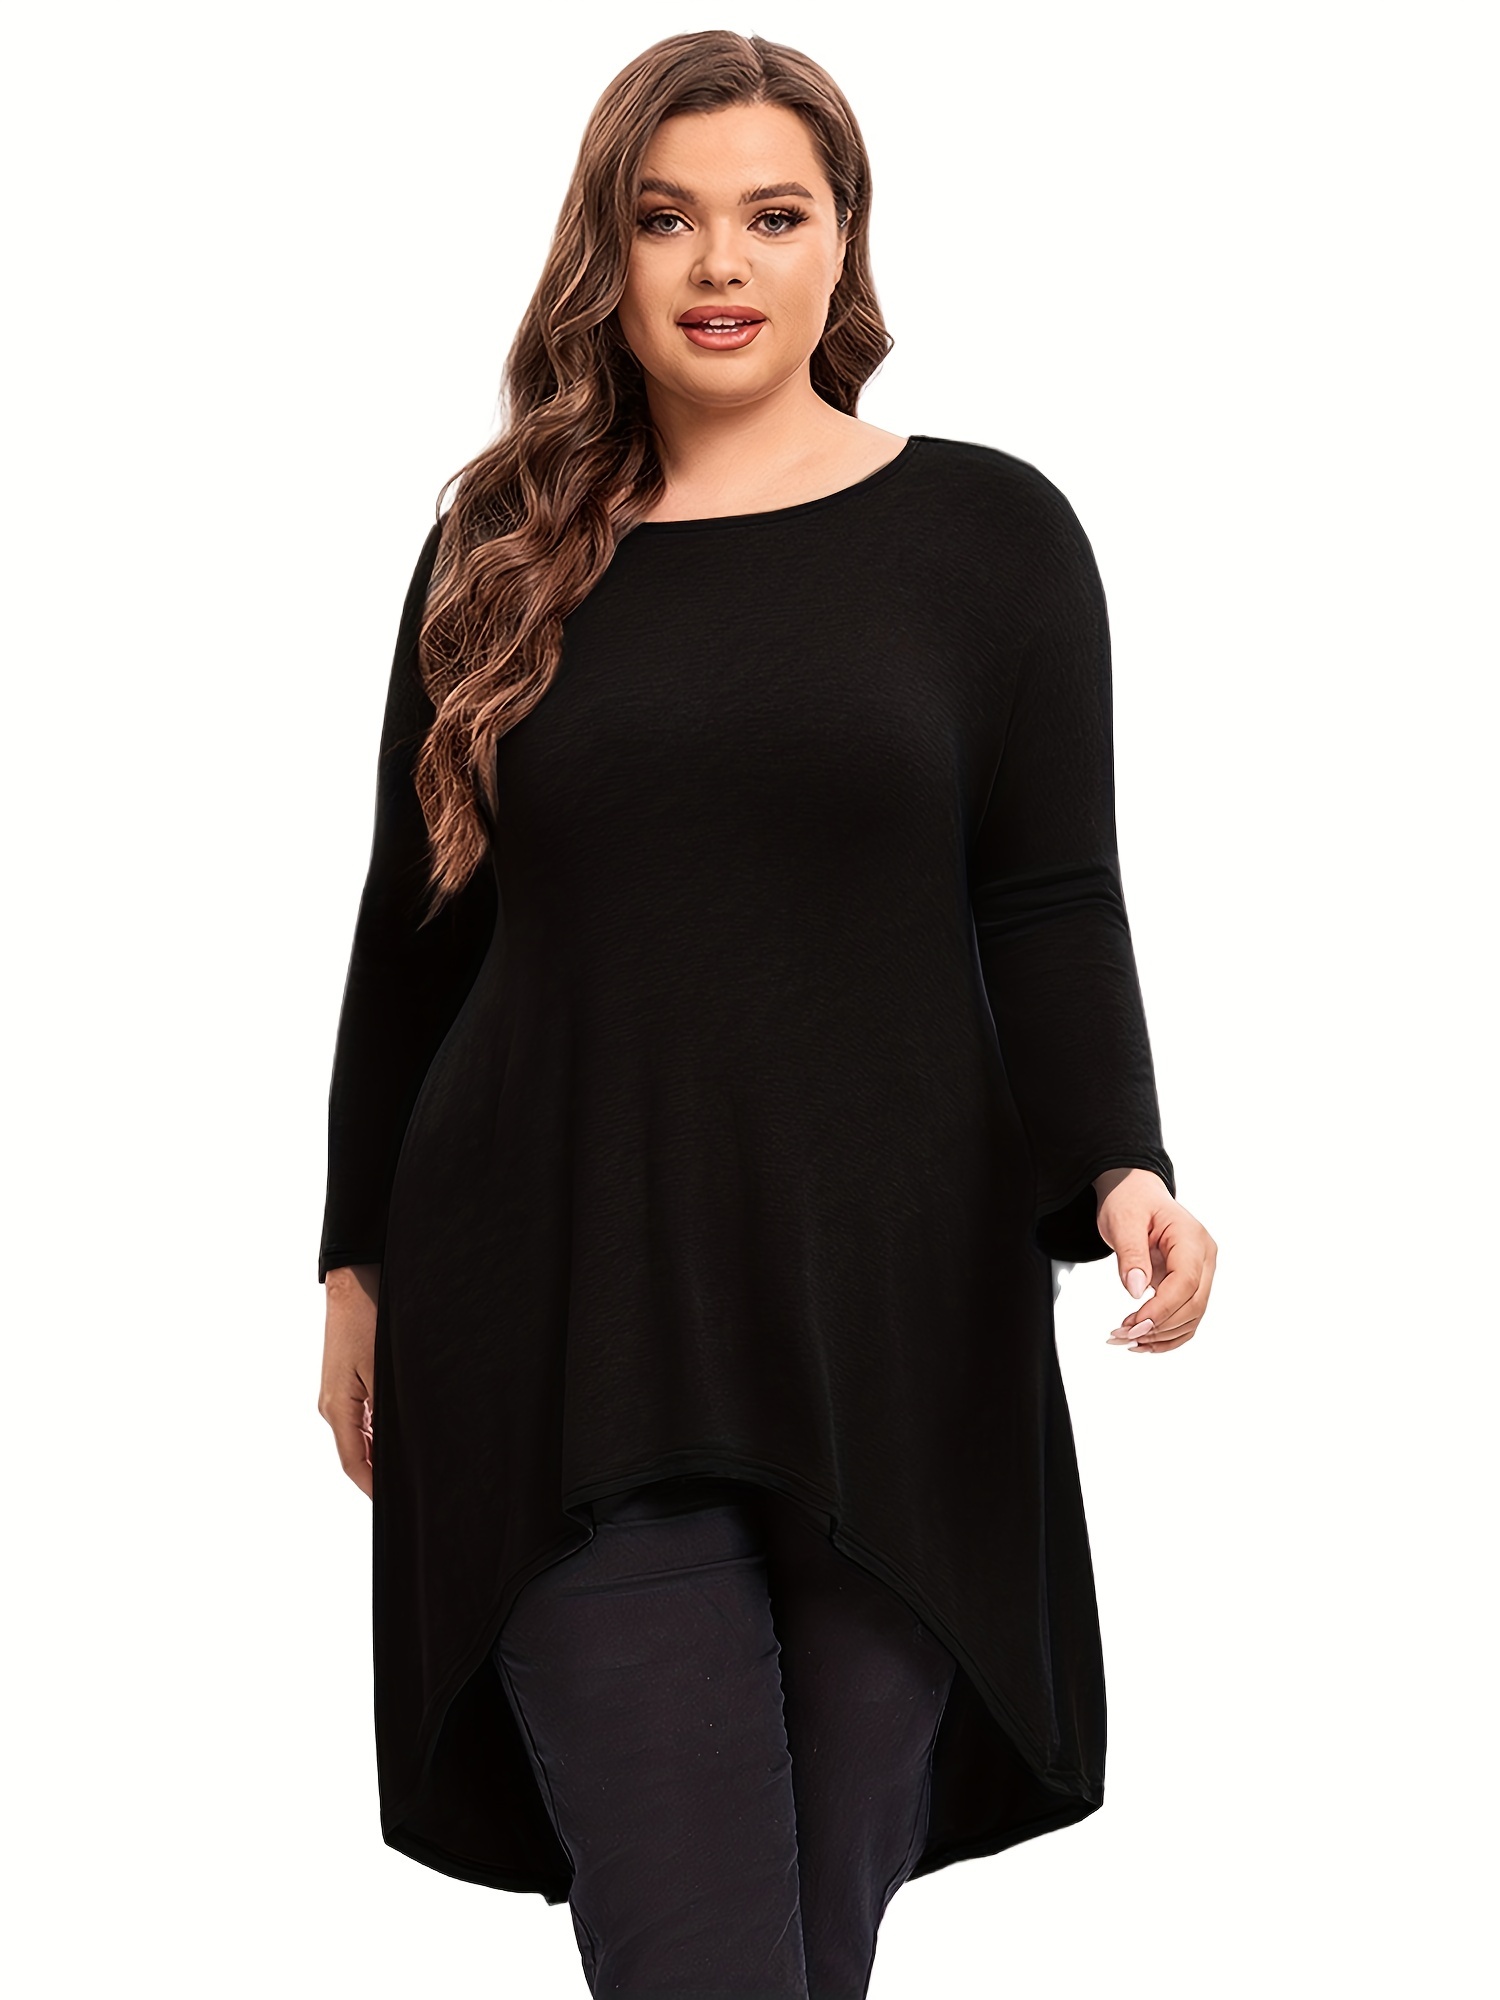 Comfy Tunic Tops to Wear with Leggings Plus Size Tops for Women Flowy  Cotton Linen Long Shirt Long Sleeve Shirts V-Neck Solid Dressy Pink XL